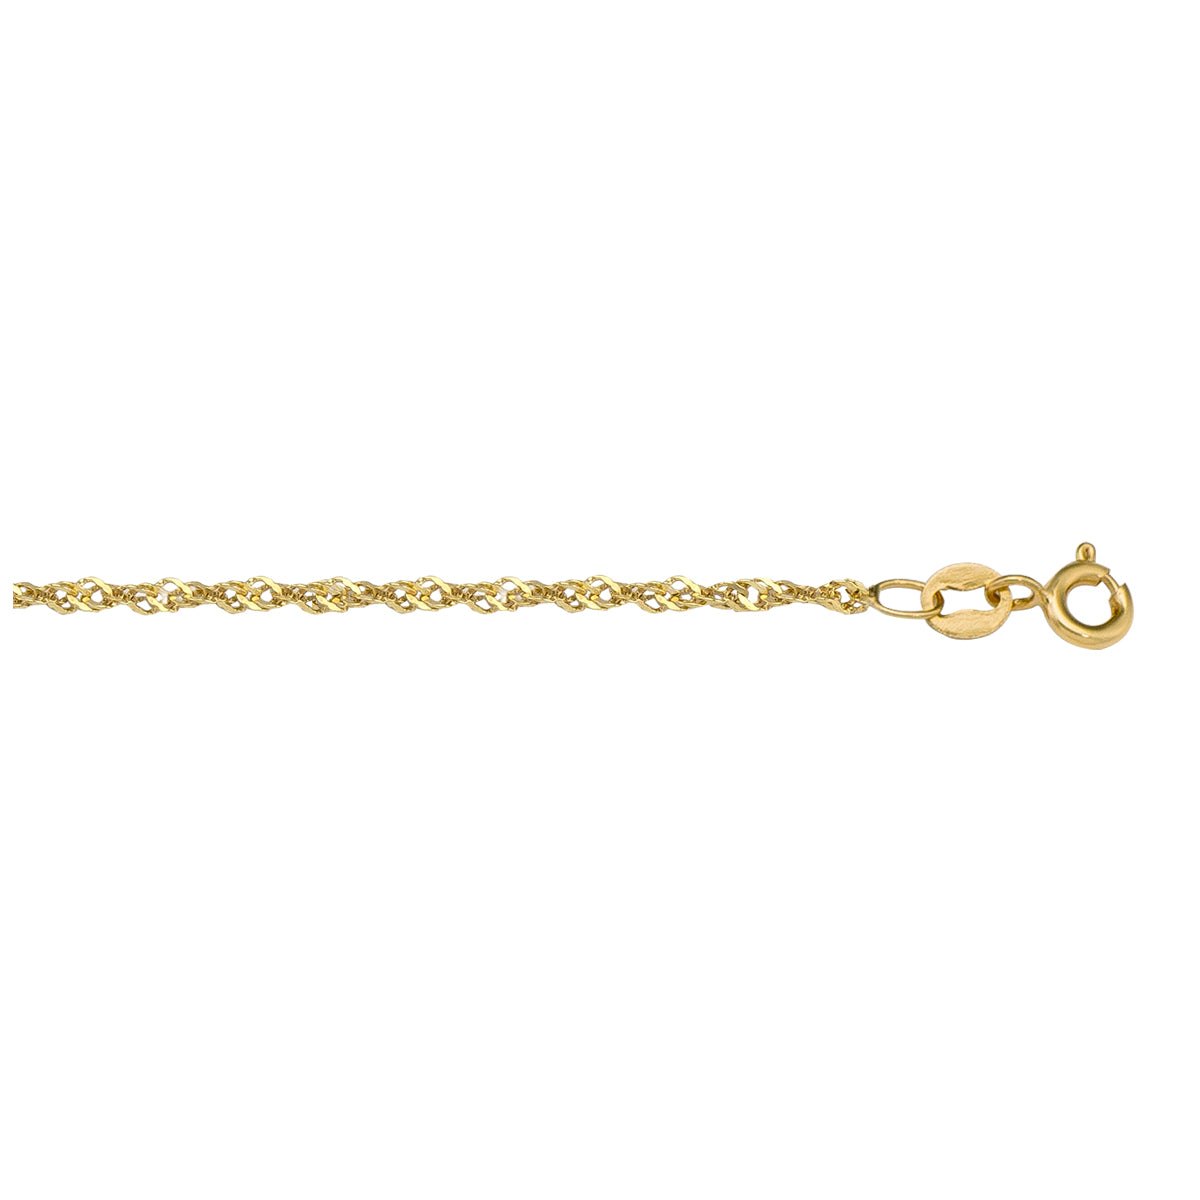 GOLD CHAIN YELLOW GOLD SOLID SINGAPORE LINK 